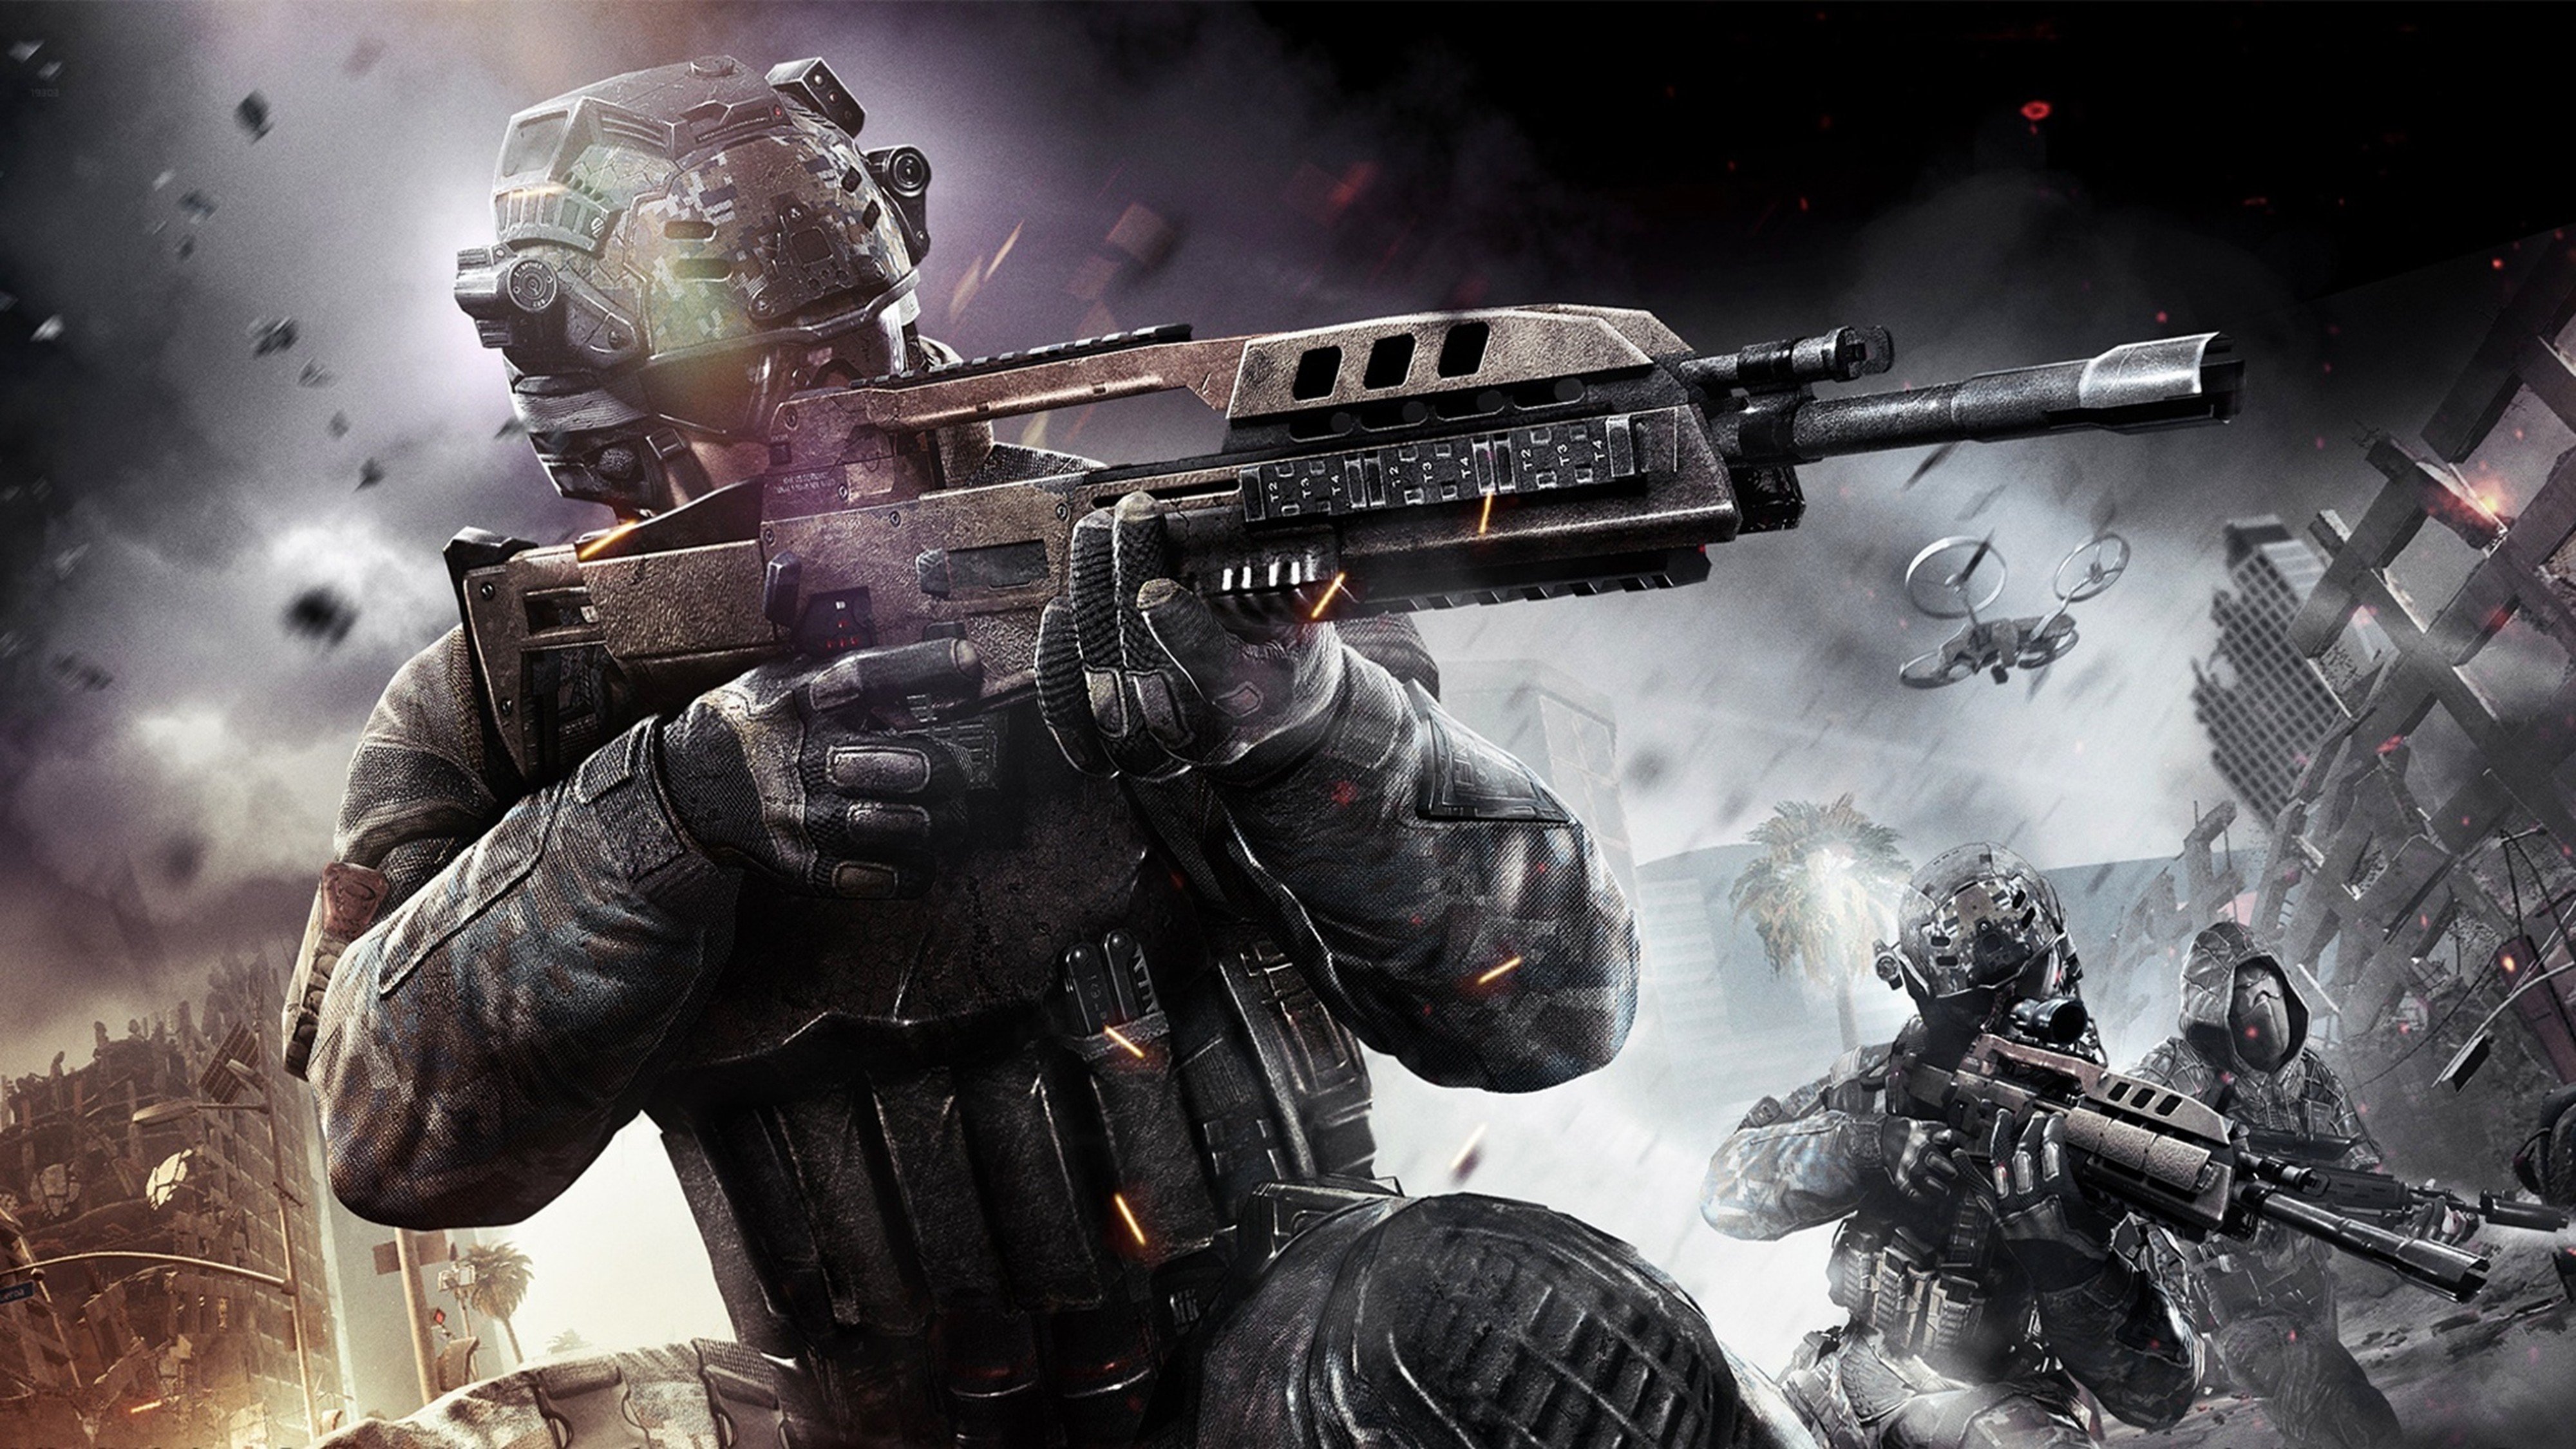 call of dutyb, Lack ops 2, Game, Rifle, 4000x2250 Wallpaper